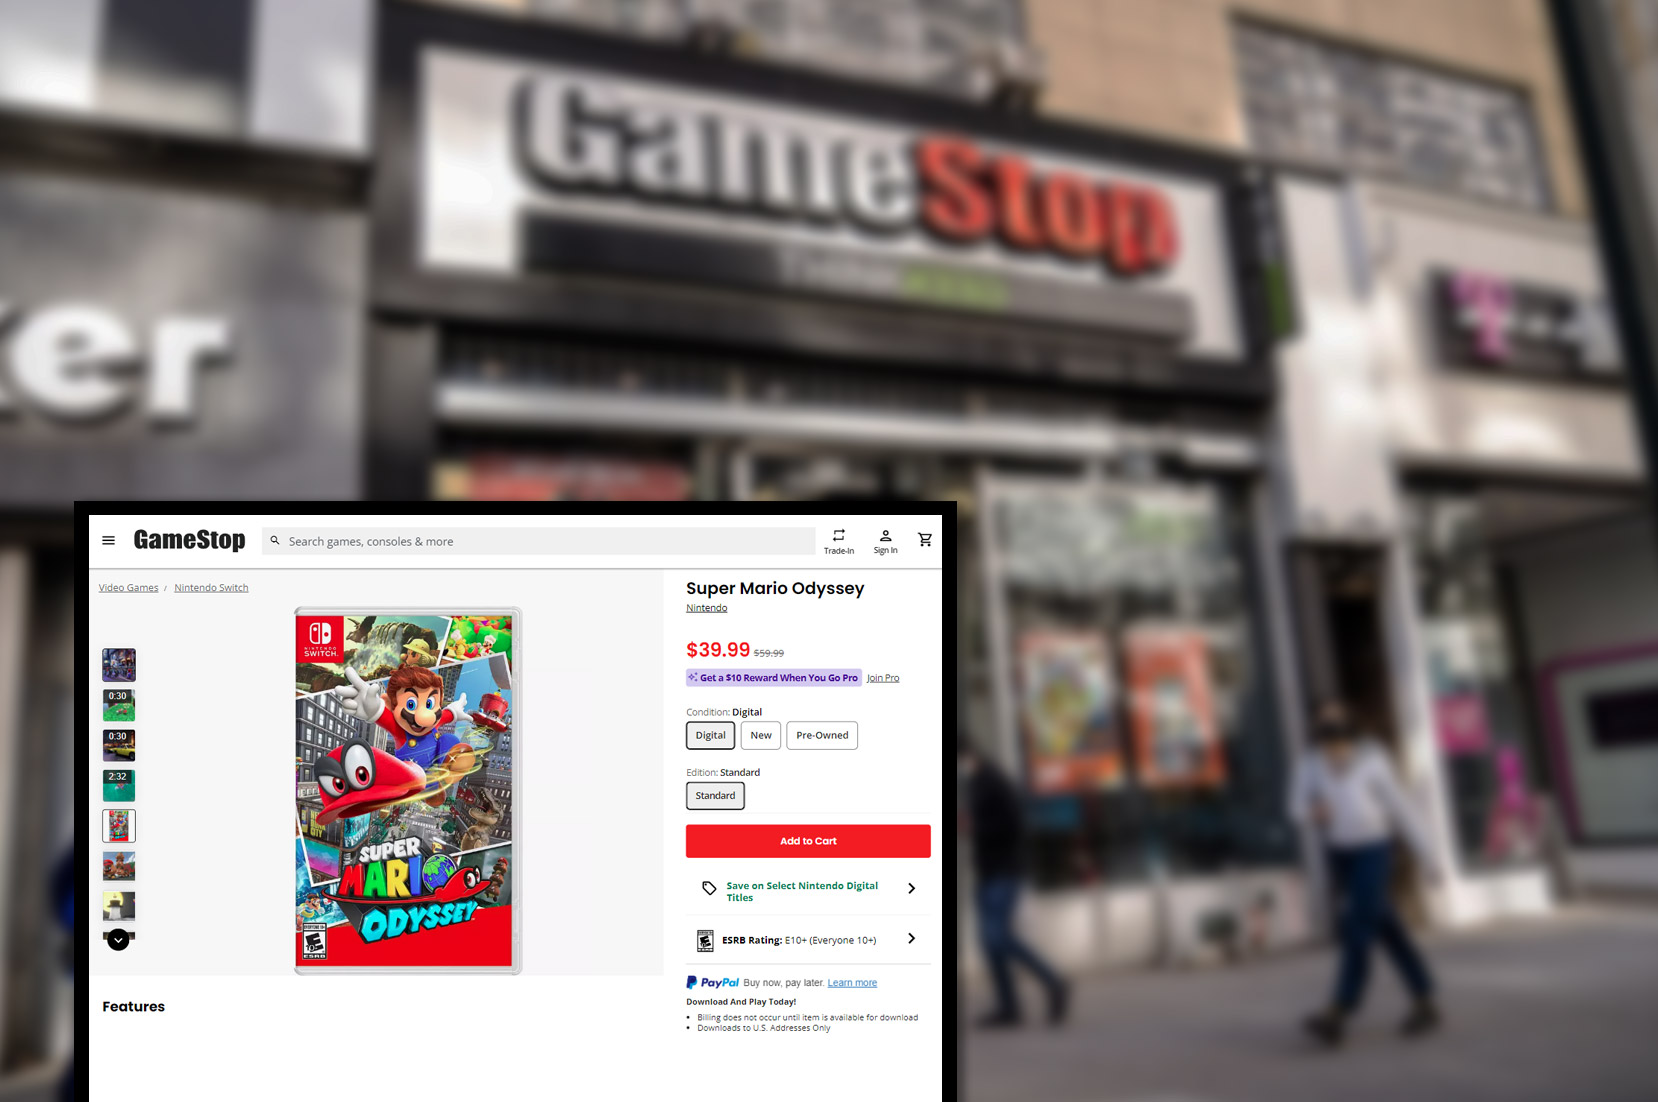 gamestop-comproduct-pricing-information-and-image-scraping-services